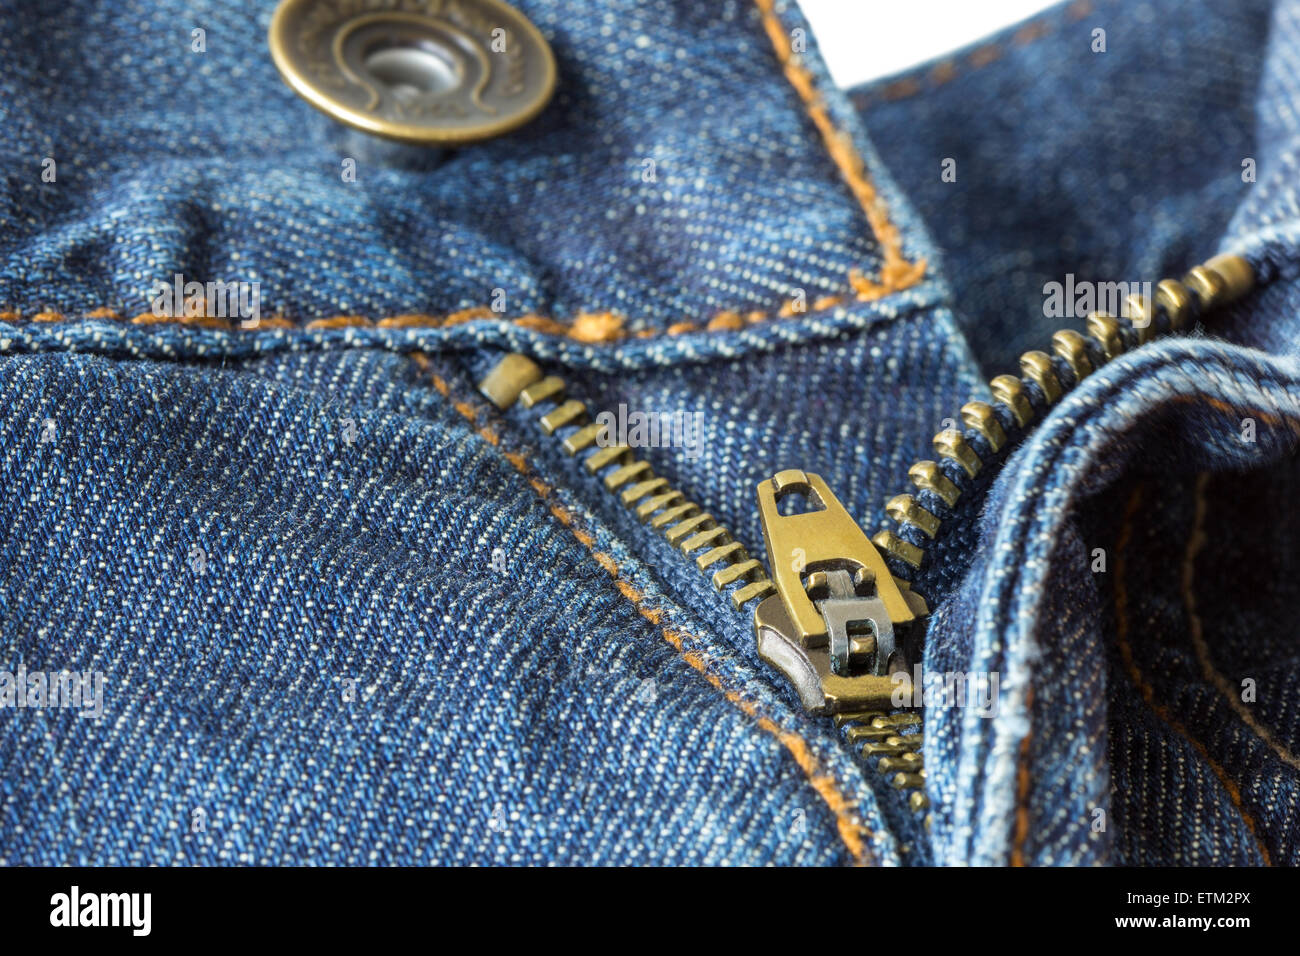 Close-up of open, unzipped and unbuttoned blue denim jeans isolated on white background Stock Photo